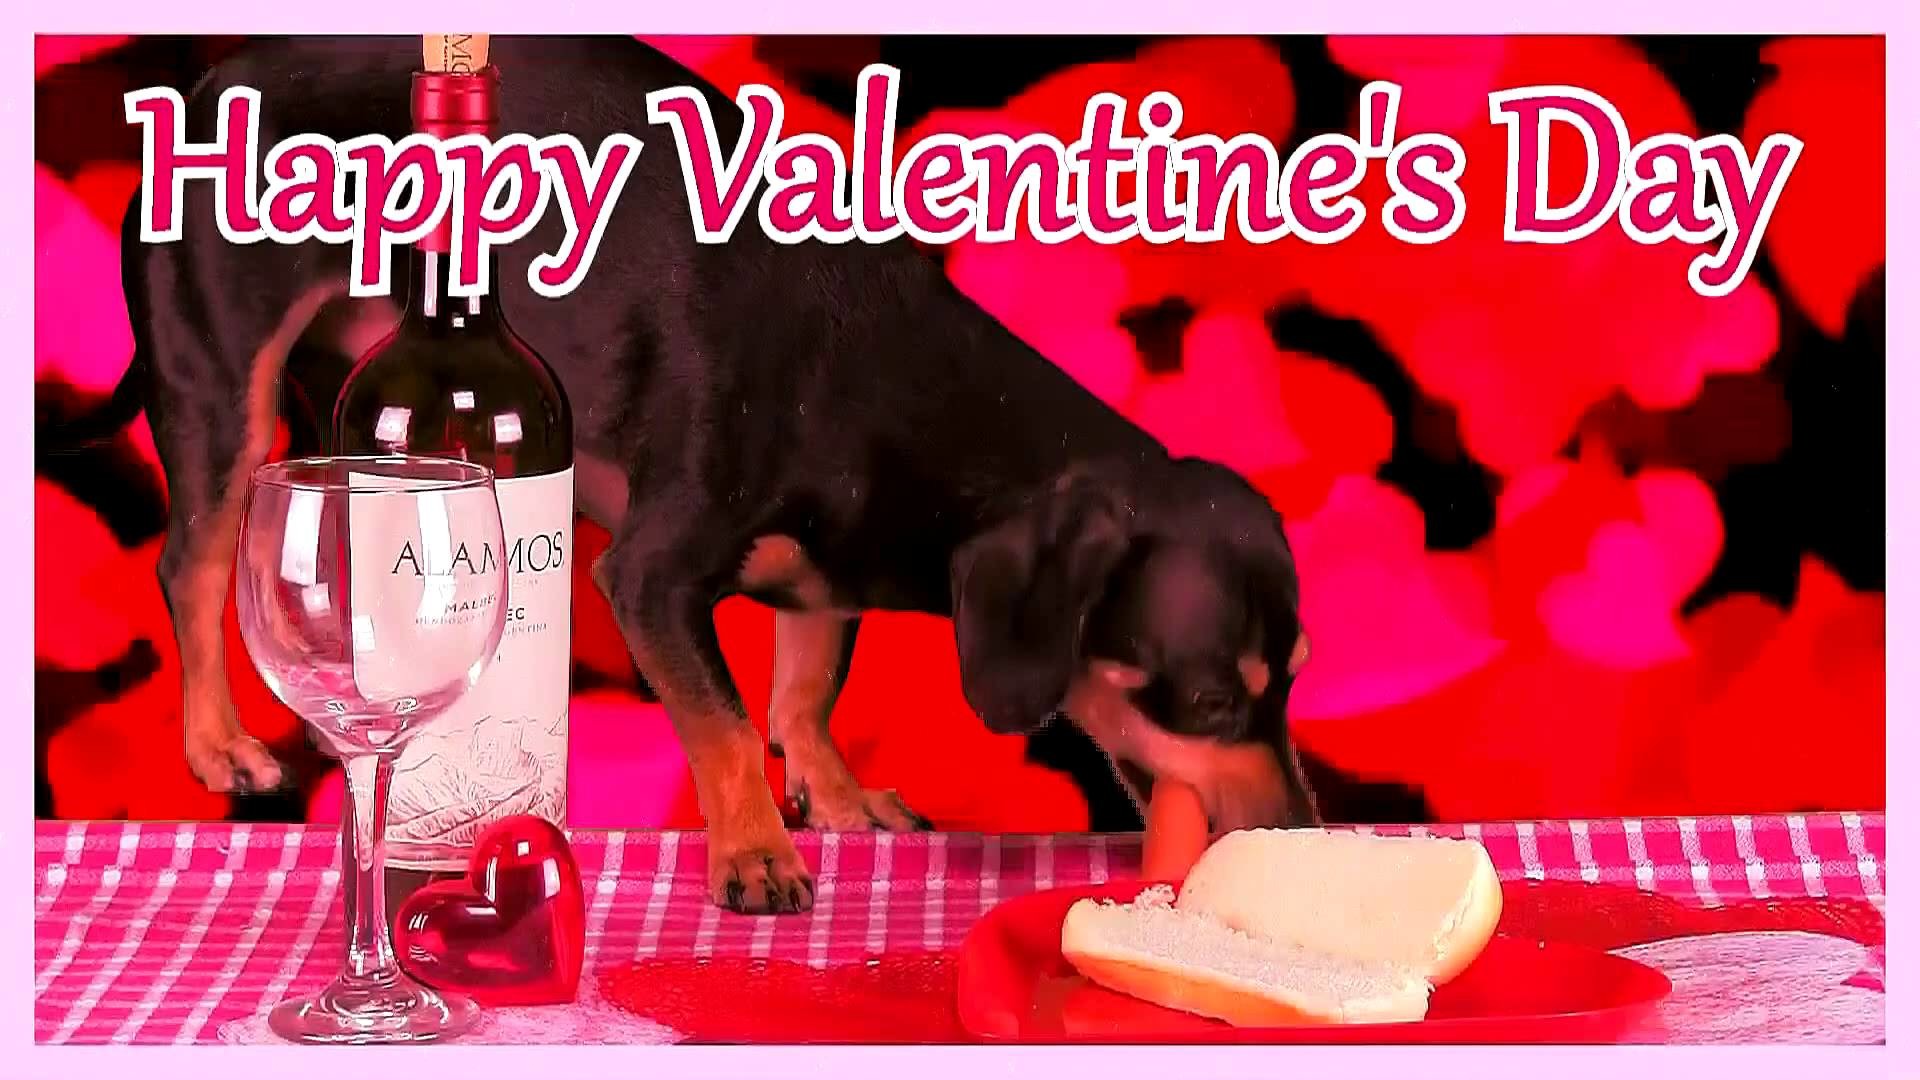 Happy Valentines Day Cute Puppy Eats a Hot Dog